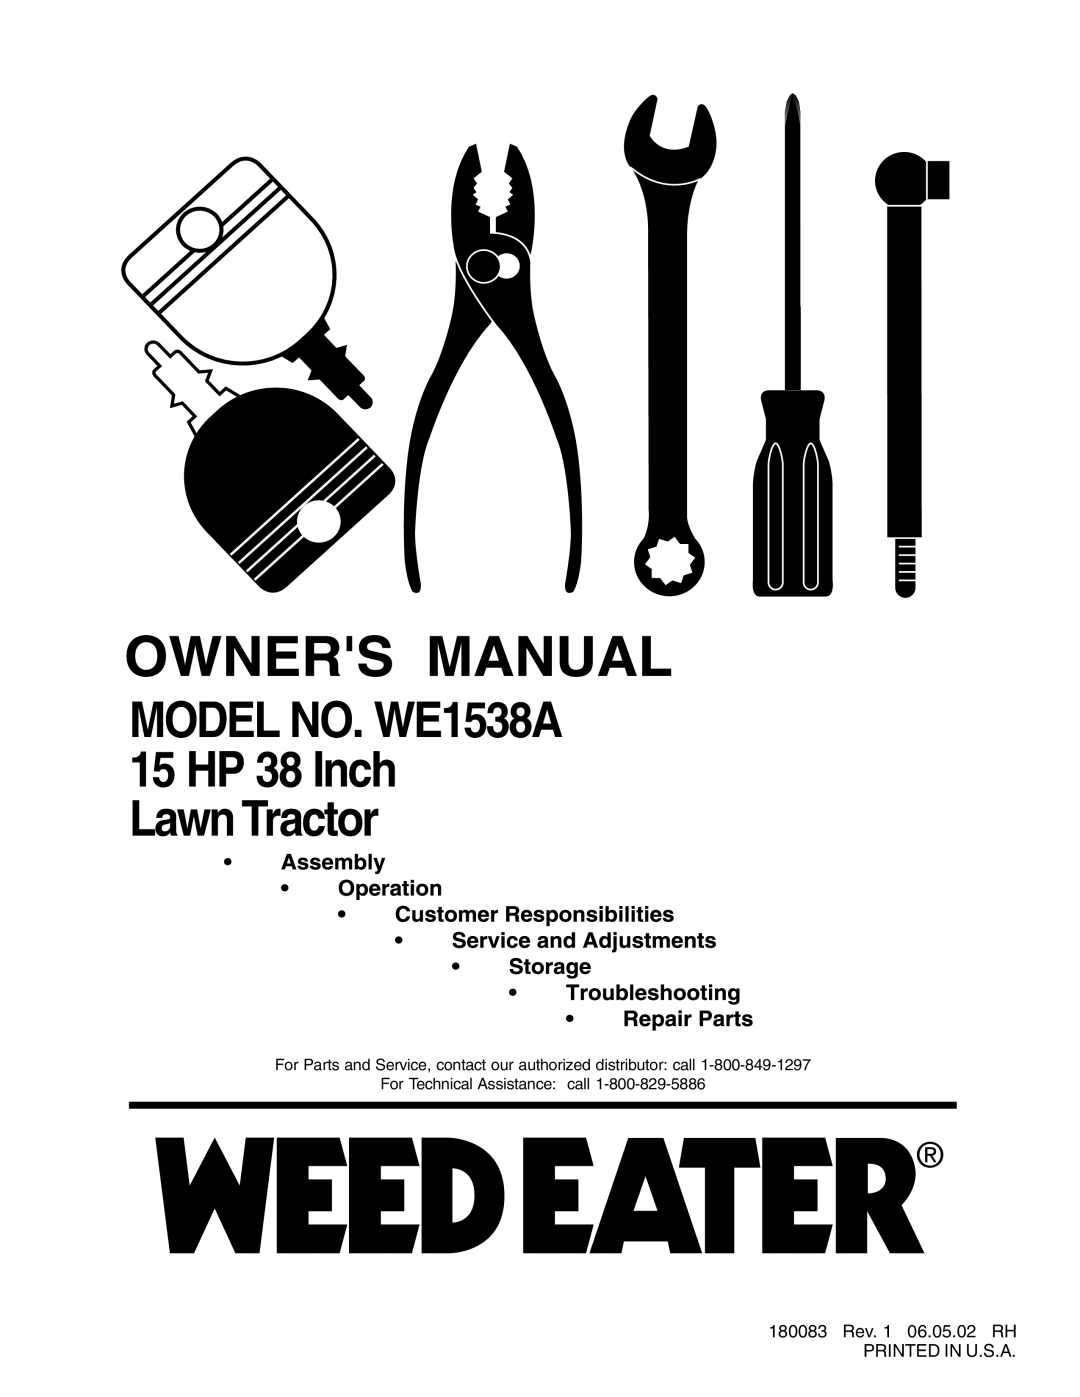 Weed Eater manual MODEL NO. WE1538A 15 HP 38 Inch Lawn Tractor, 180083 Rev. 1 06.05.02 RH PRINTED IN U.S.A 